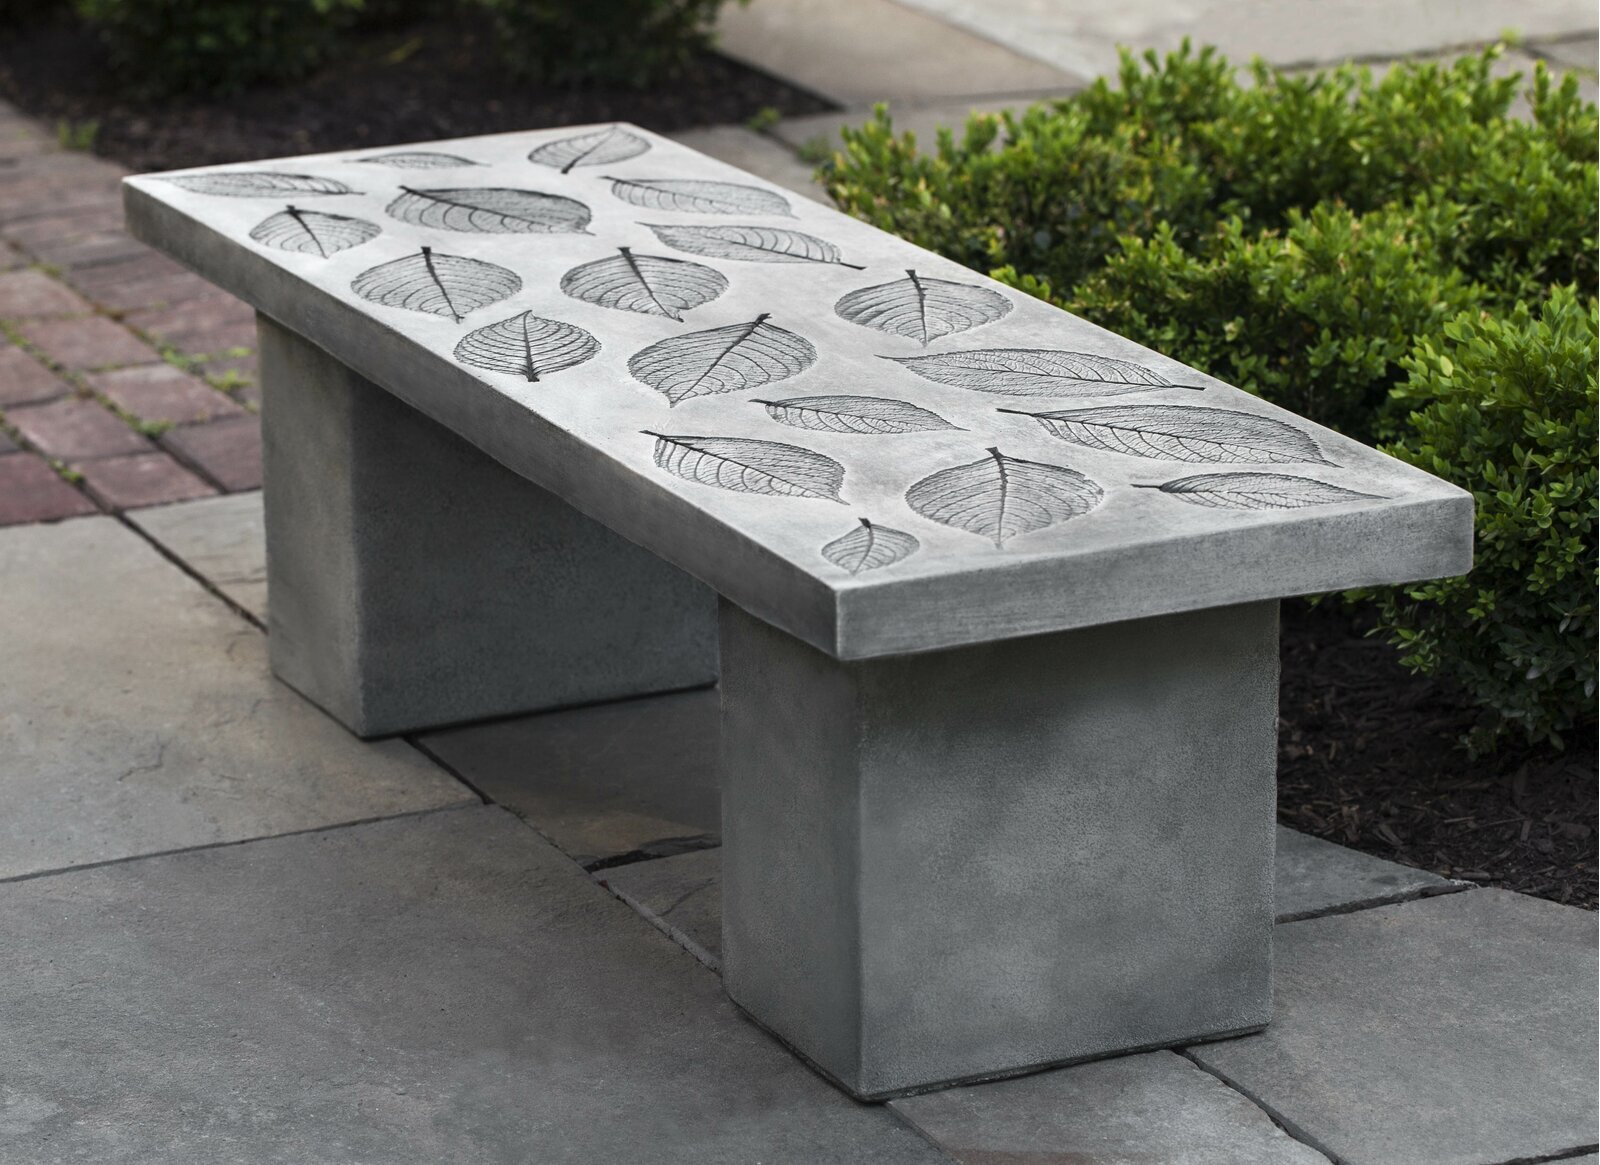 Leaf Imprinted Concrete Outdoor Seating